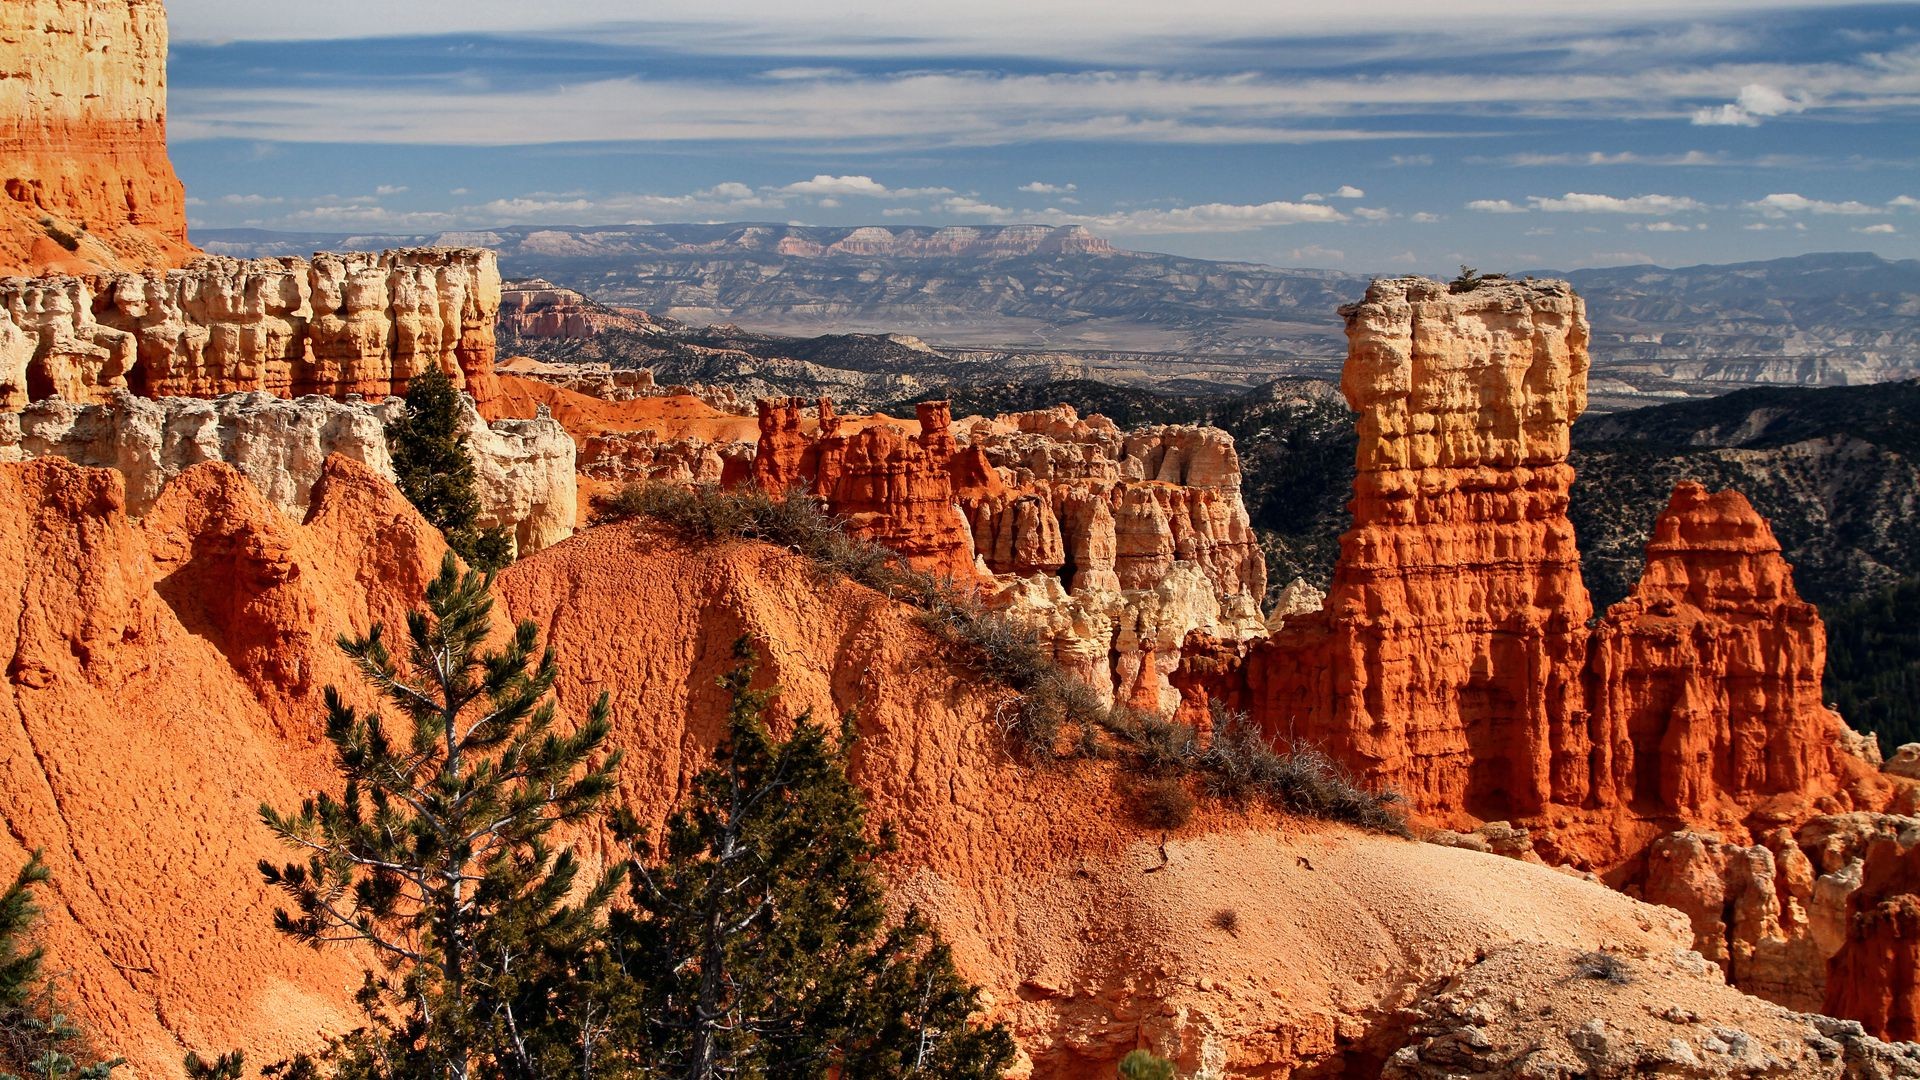 24 Bryce Canyon National Park Hd Wallpapers - Bryce Canyon National Park , HD Wallpaper & Backgrounds